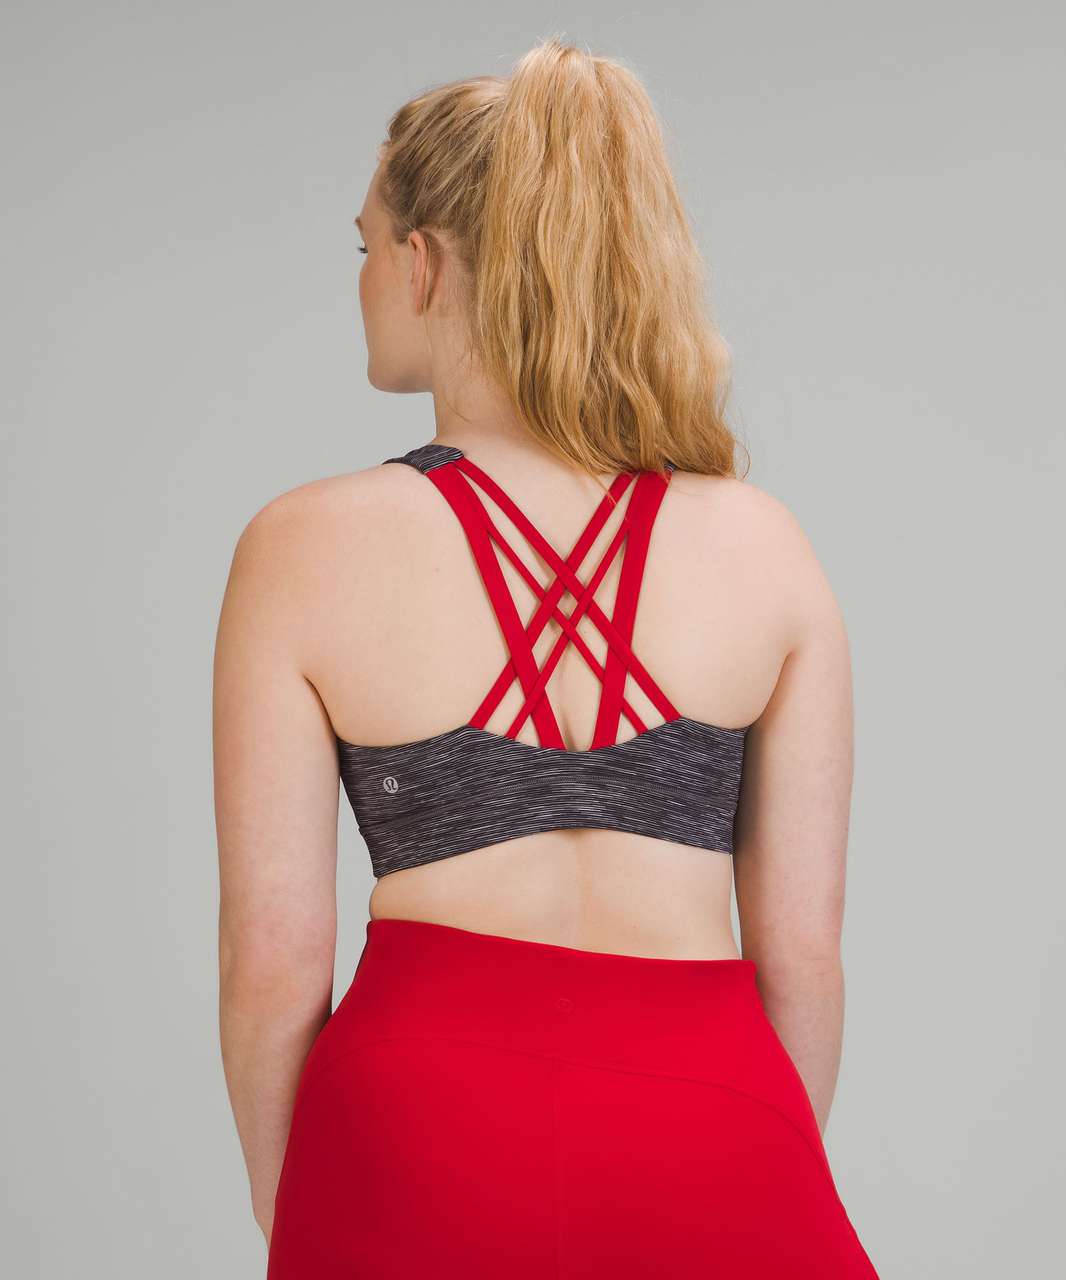 Lululemon Free to Be Elevated Bra *Light Support, DD/DDD(E) Cups - Wee Are From Space Dark Carbon Ice Grey / Dark Red